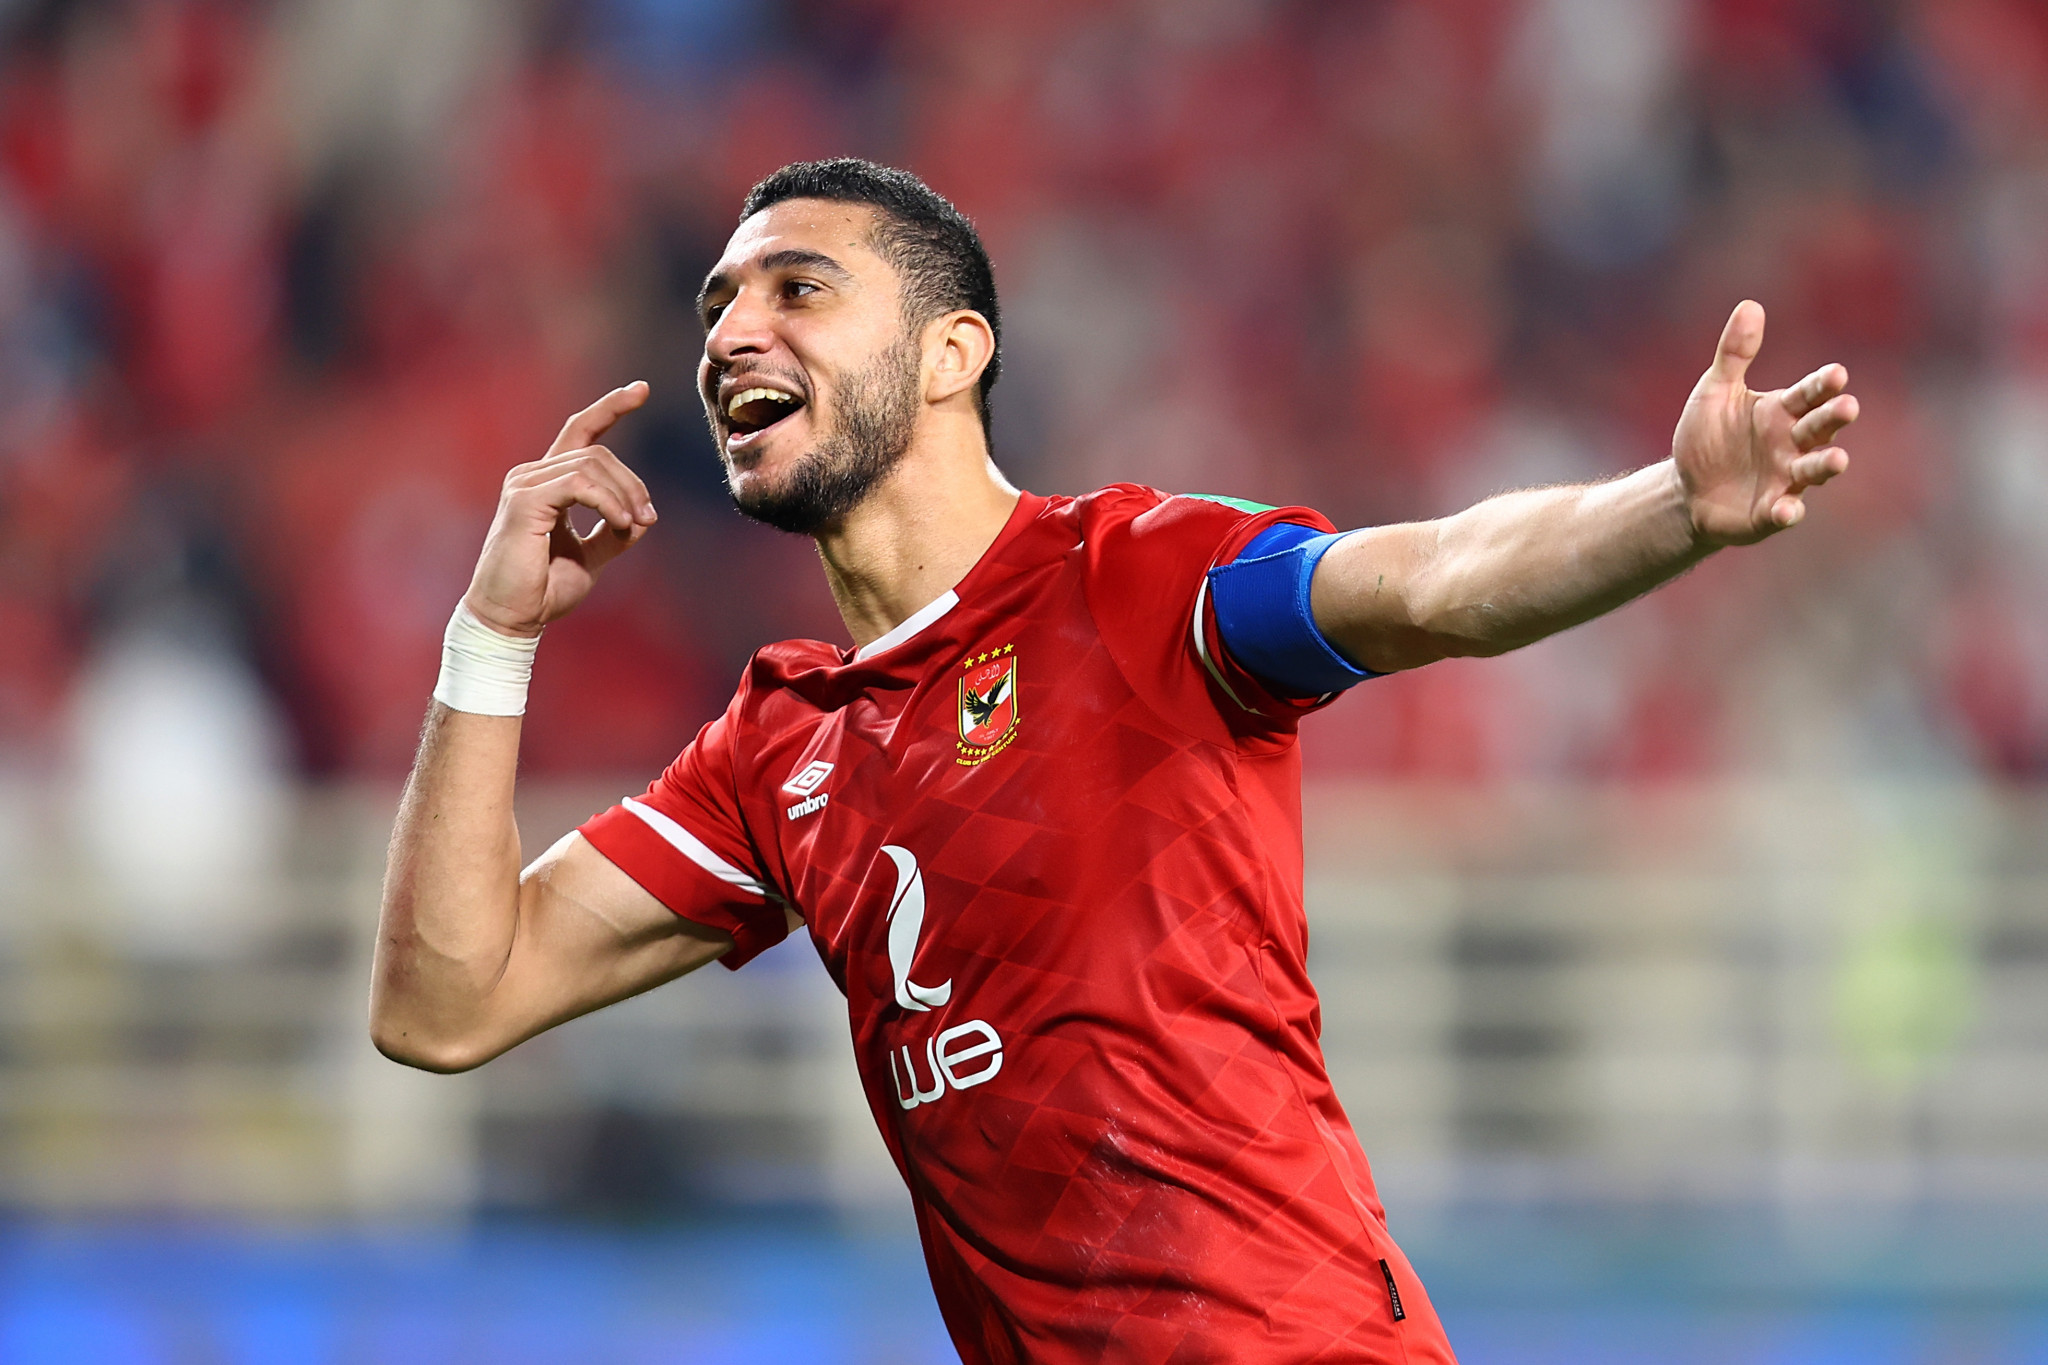 Rami Rabia captained Al Ahly to victory against Monterrey ©Getty Images